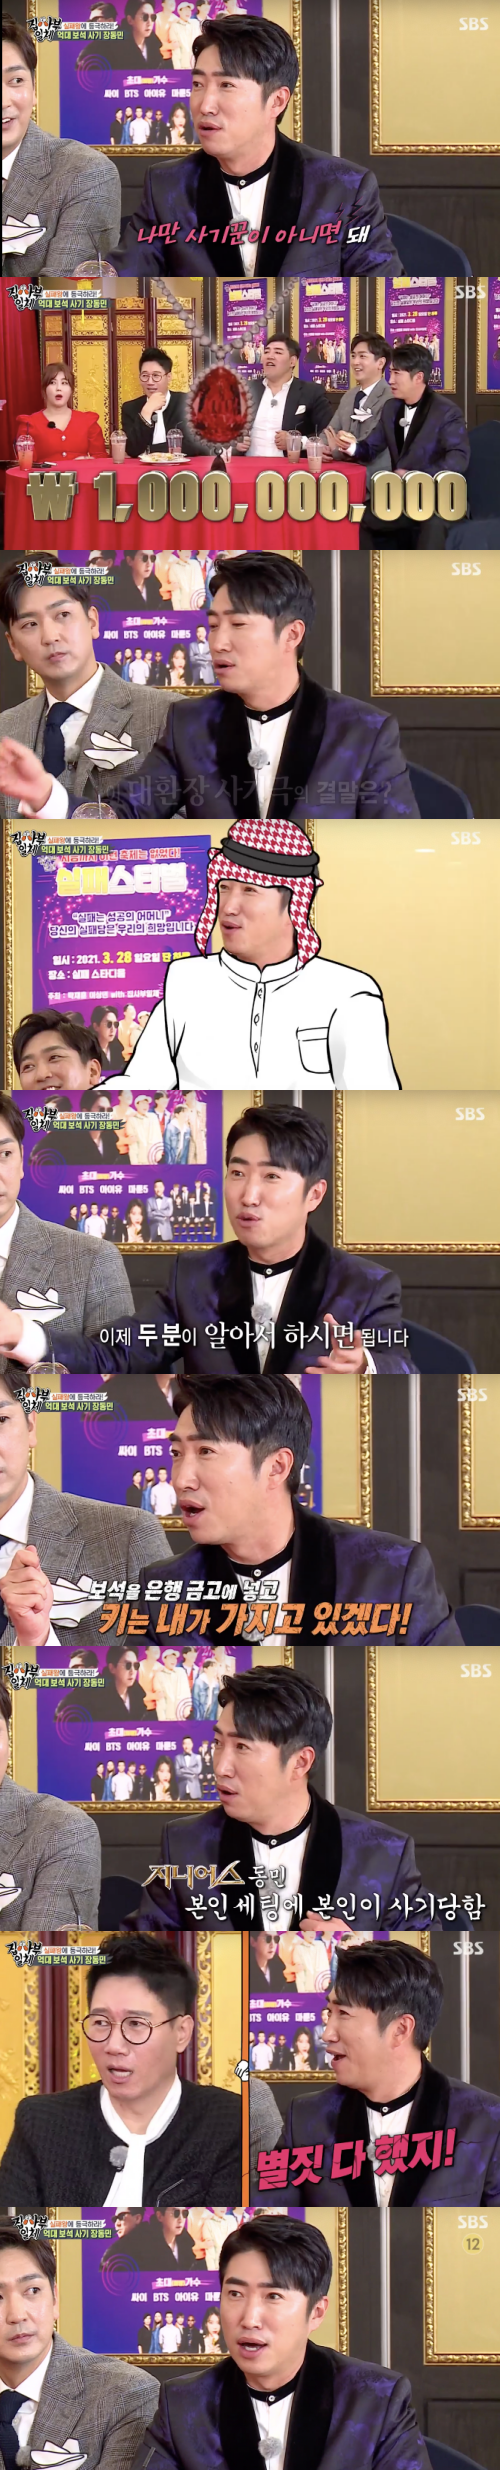 In All The Butlers, the story of the failure of the testicle RUPTURE of Kim Min-soo, a mixed martial arts player who surpassed Jang Dong-mins 5 billion debt fraud failure, surprised everyone and became a failure king.At SBS Entertainment All The Butlers, which aired on the 28th, members reported on the 2021 super-large project Failure Stival in earnest.Shim Soo-chang and Kim Min-soo followed the anecdote of Jang Dong-min.Ten years ago, Jewelry asked me to borrow about 300 million Jewelry from the pawn shop, said Jang Dong-min, because Ive never seen a baby or ruby, and a small 60-carat, an appraiser said it would cost a billion won.I just introduced it and said, Friend doesnt know Jewelry and can give it to Jang Dong-min, said Jang Dong-min, who said, I dont think Ill lose even if I hit 55 cheaply, but there are no 300 million people around me and Ive asked them to call for it.I thought I was the only one who set up, and I had about 20 million won in interest for 300 million a month, Jang Dong-min said, adding, I decided to write a guarantee and lend money, but instead I put Jewelry in the World Bank safe and said I would have the key, so I did everything I could not get it.Jang Dong-min said, I put it in the VVIP safe in Jongno, only a few hundred dollars a month, and Jewelry is solved if it is sold well. I thought it would be over in 60 carat Rubisar Dubai in a few days, but after a month or two, Friend said why I did not give Interest. I asked him to pay it.I started giving an interest in money I had not touched since that month, and I thought I was even pouring 2,000 dollars, he said. It was six months ago that I was saddened that the interest was only 150 million won for the jewelery deposit.I didnt even have a World Bank charge later, so I brought Jewelry into my golf bag and brought it home, I called 30 people I knew, and I prepared three of the same golf bags, and I didnt hear the real Jewelry bag, said Jang Dong-min.After that, I thought I was going to sell fast, so I went to Jongno, and the appraiser called the 1 billion won 2,000, and the other one was rejected, and the sum was 40 million won, said Jang Dong-min. Even if it was so elaborate, I was right in the back.He said he was fraudulently fraudulent for 5 billion Jewelry, and Jang Dong-min also emerged as a potential candidate for failure.After that, he played a game for the failed steer failure king and Kim Min-soo won Cha Eun-woo in the first round.Next, the All The Butlers members and the failed star team were confronted, and the All The Butlers team won.Nevertheless, the failed teams showed a positive attitude, saying, It is a success to fail. Kim Min-soo, a mixed martial arts player who confessed to the testicle RUPTURE unexpectedly at the end of the broadcast, became a failure king.It was a disastrous failure story that surpassed Jang Dong-mins 5 billion fraud failure story.All of them were human victory, and he was attracted to the recent situation of living healthy as a father of two children.Capture All The Butlers Broadcast Screen